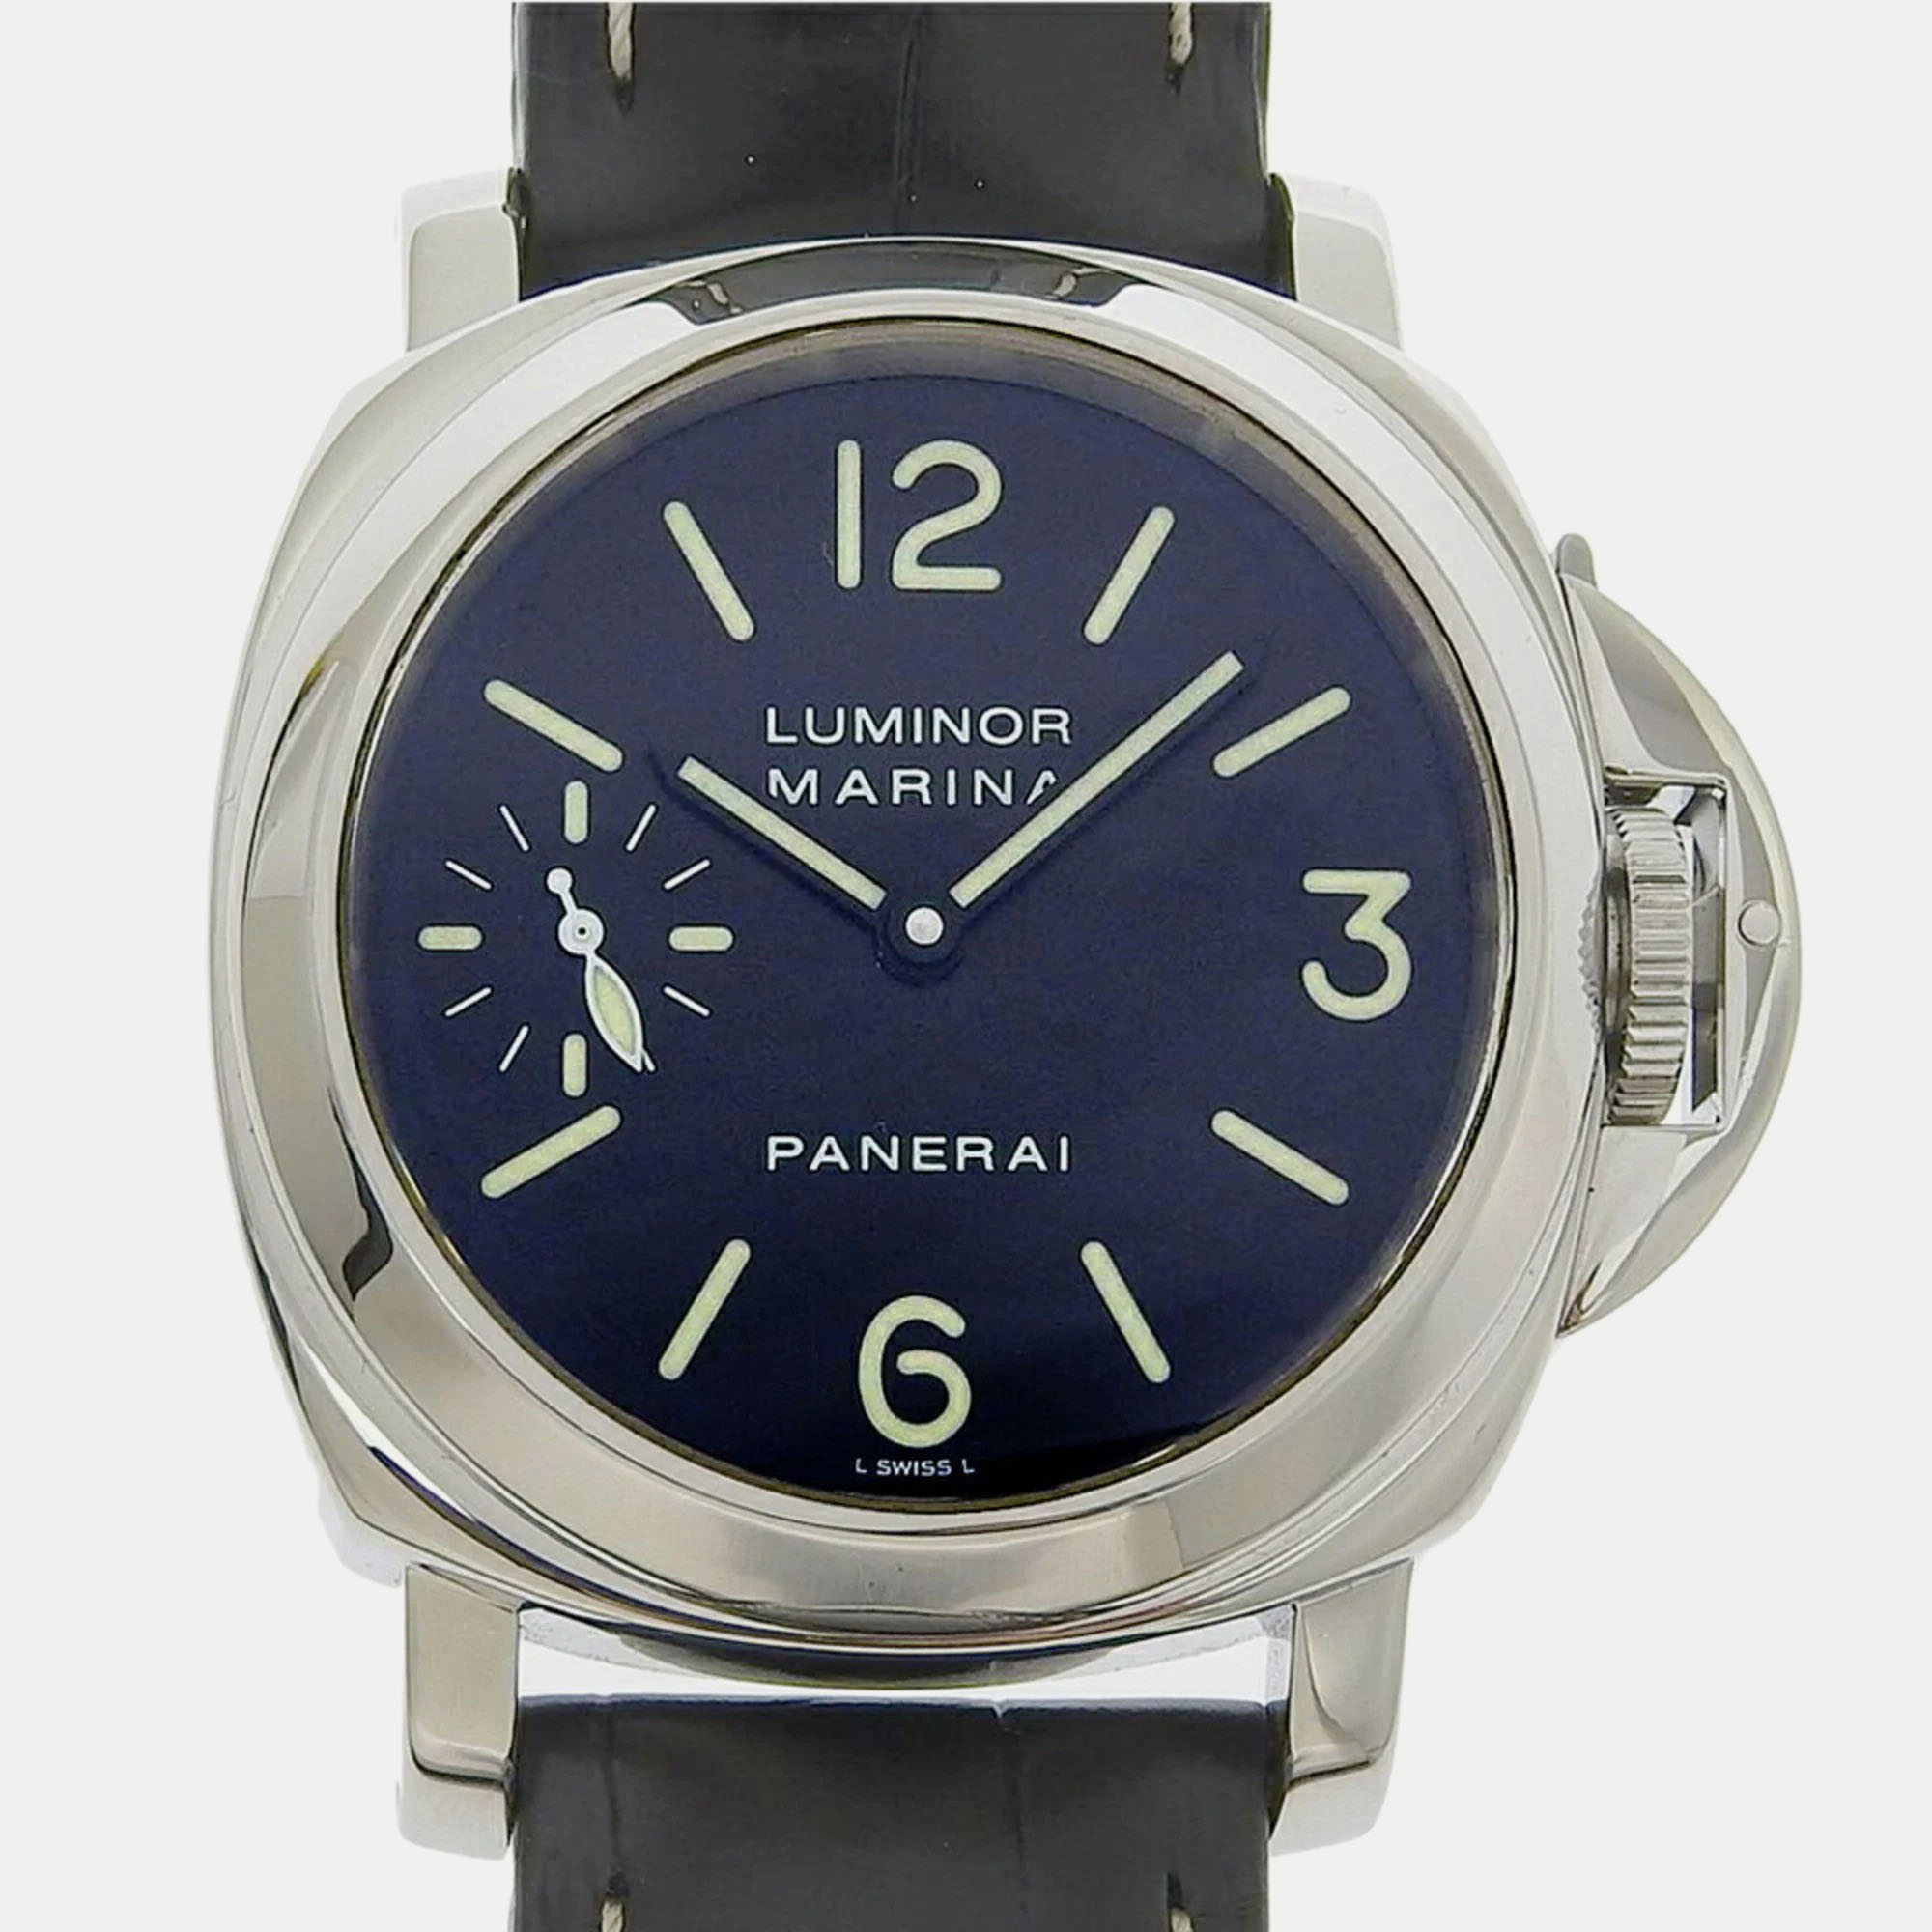 Sophisticated design and traditions of fine watchmaking characterize this authentic Panerai timepiece. Grace your wrist with this luxurious piece and instantly elevate your day.